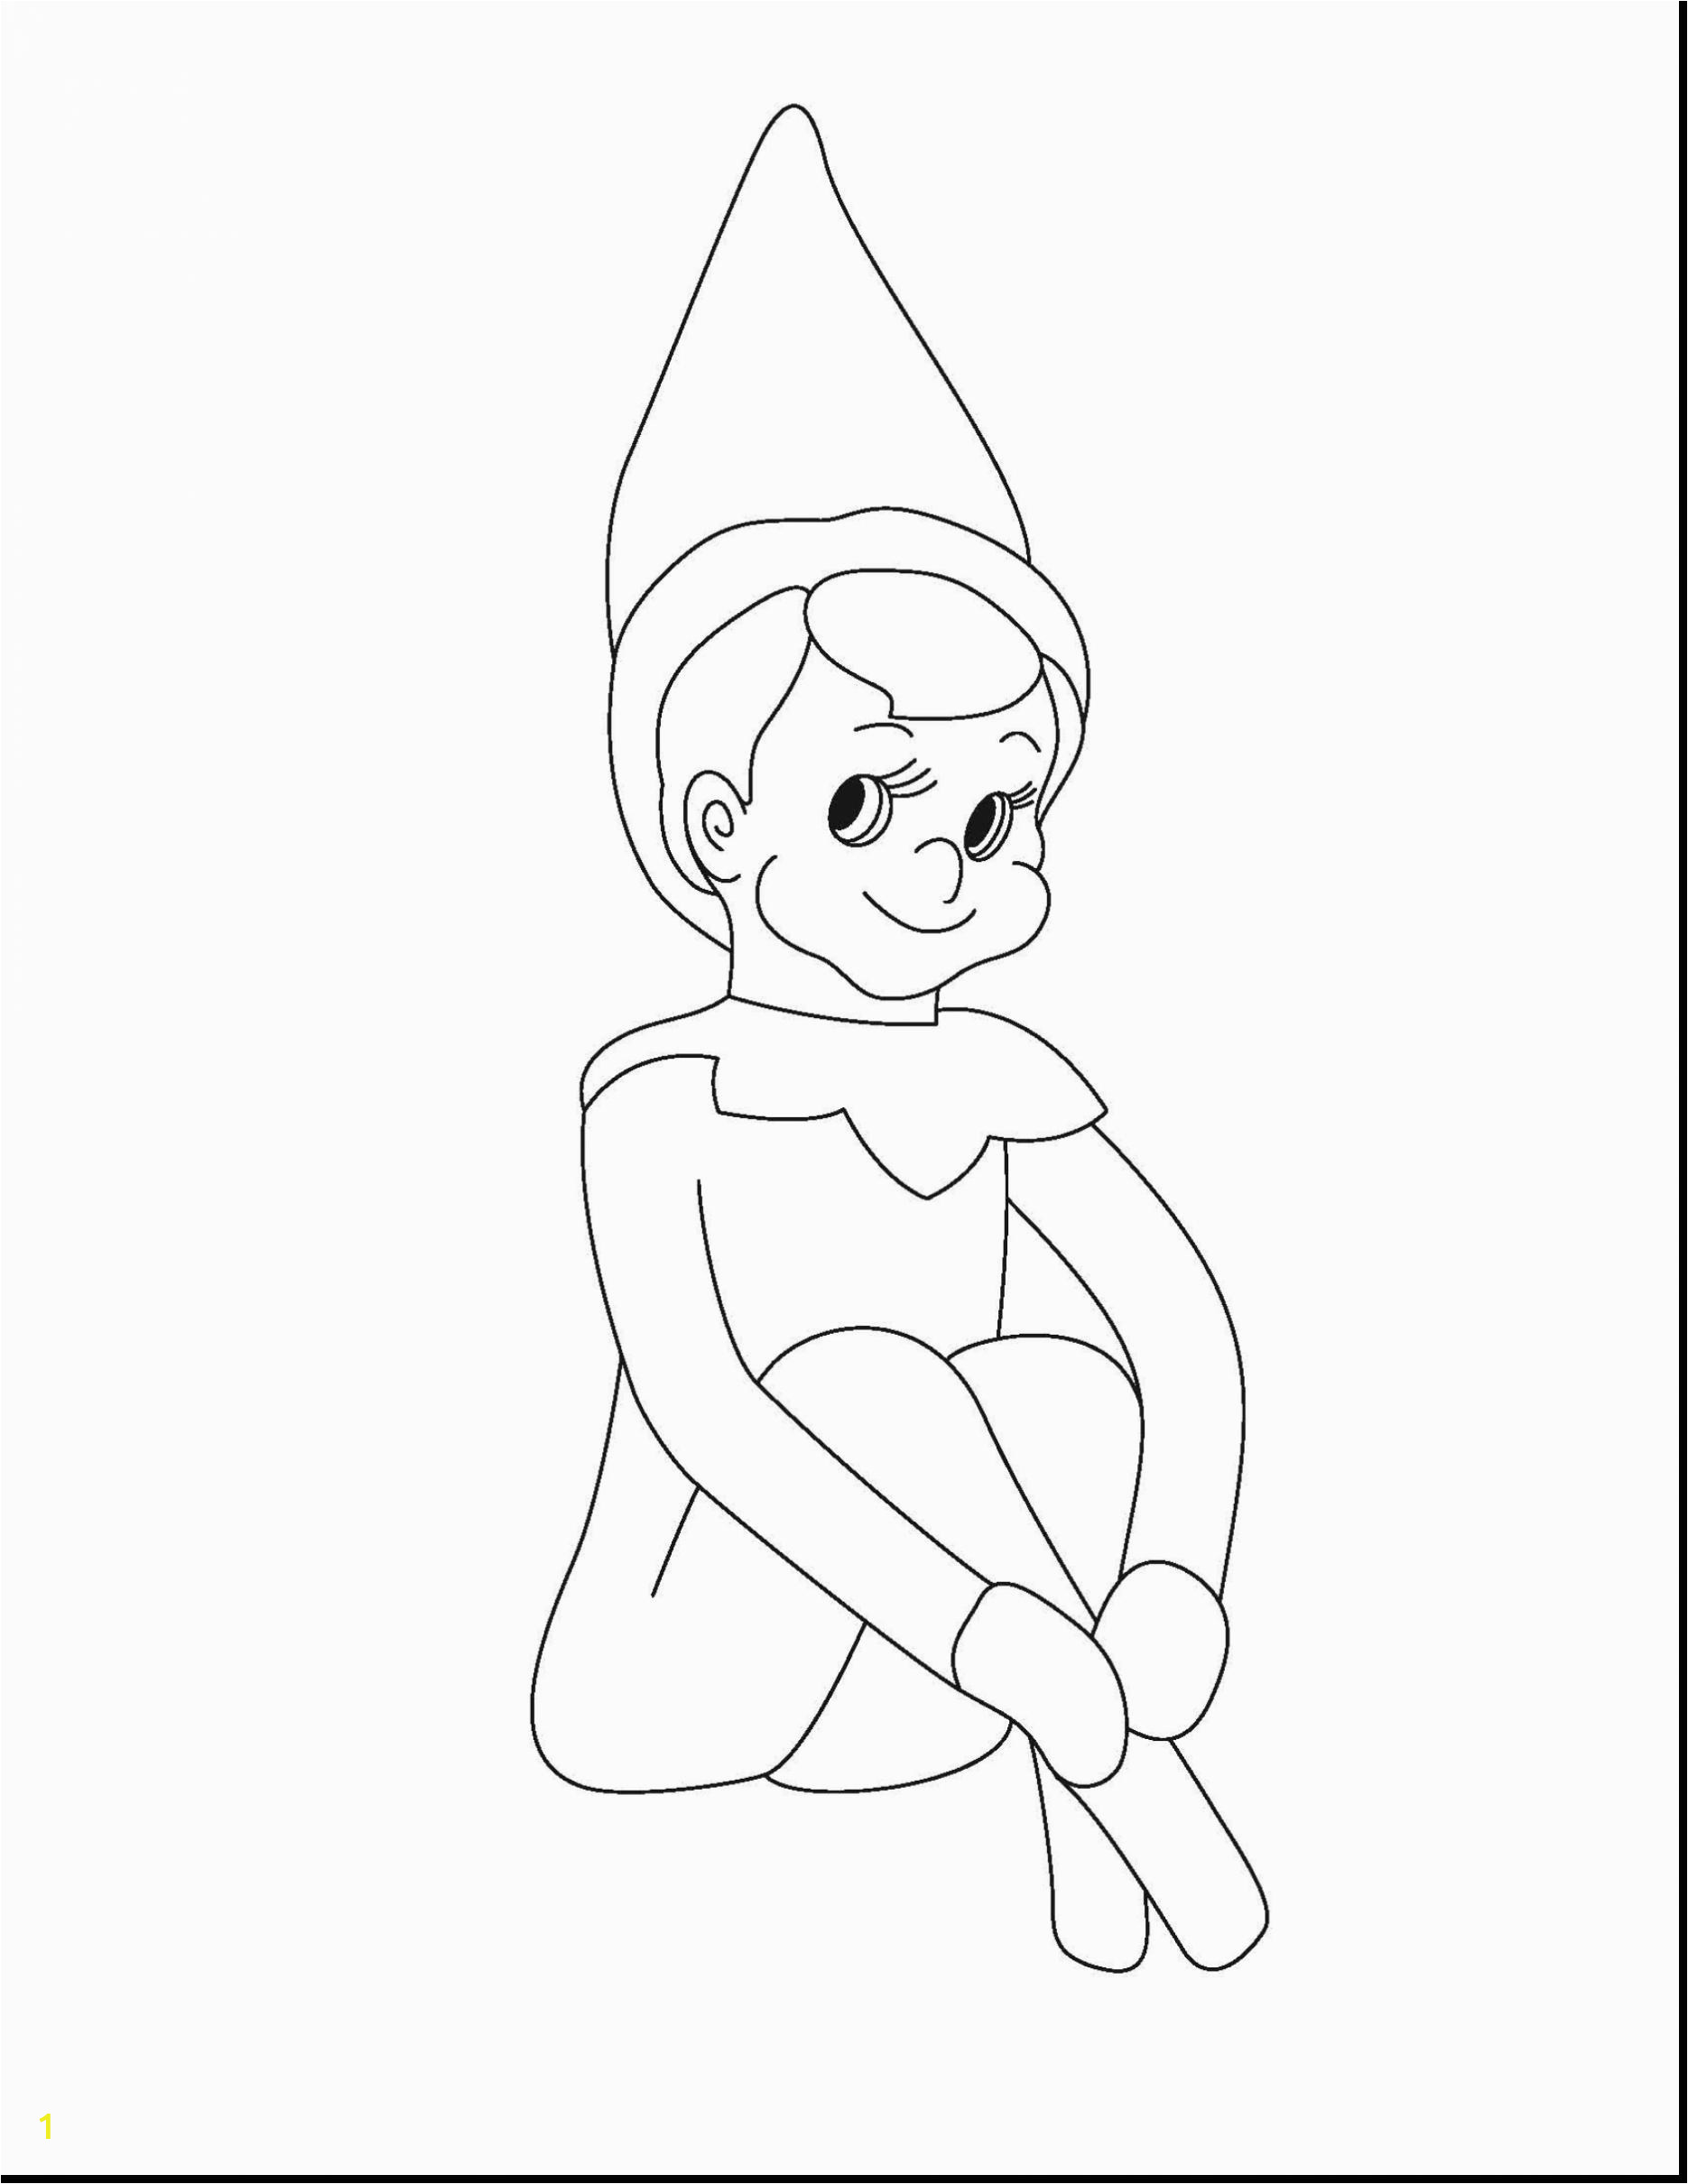 girl elf on the shelf coloring pages girl elf on the shelf coloring pages 4